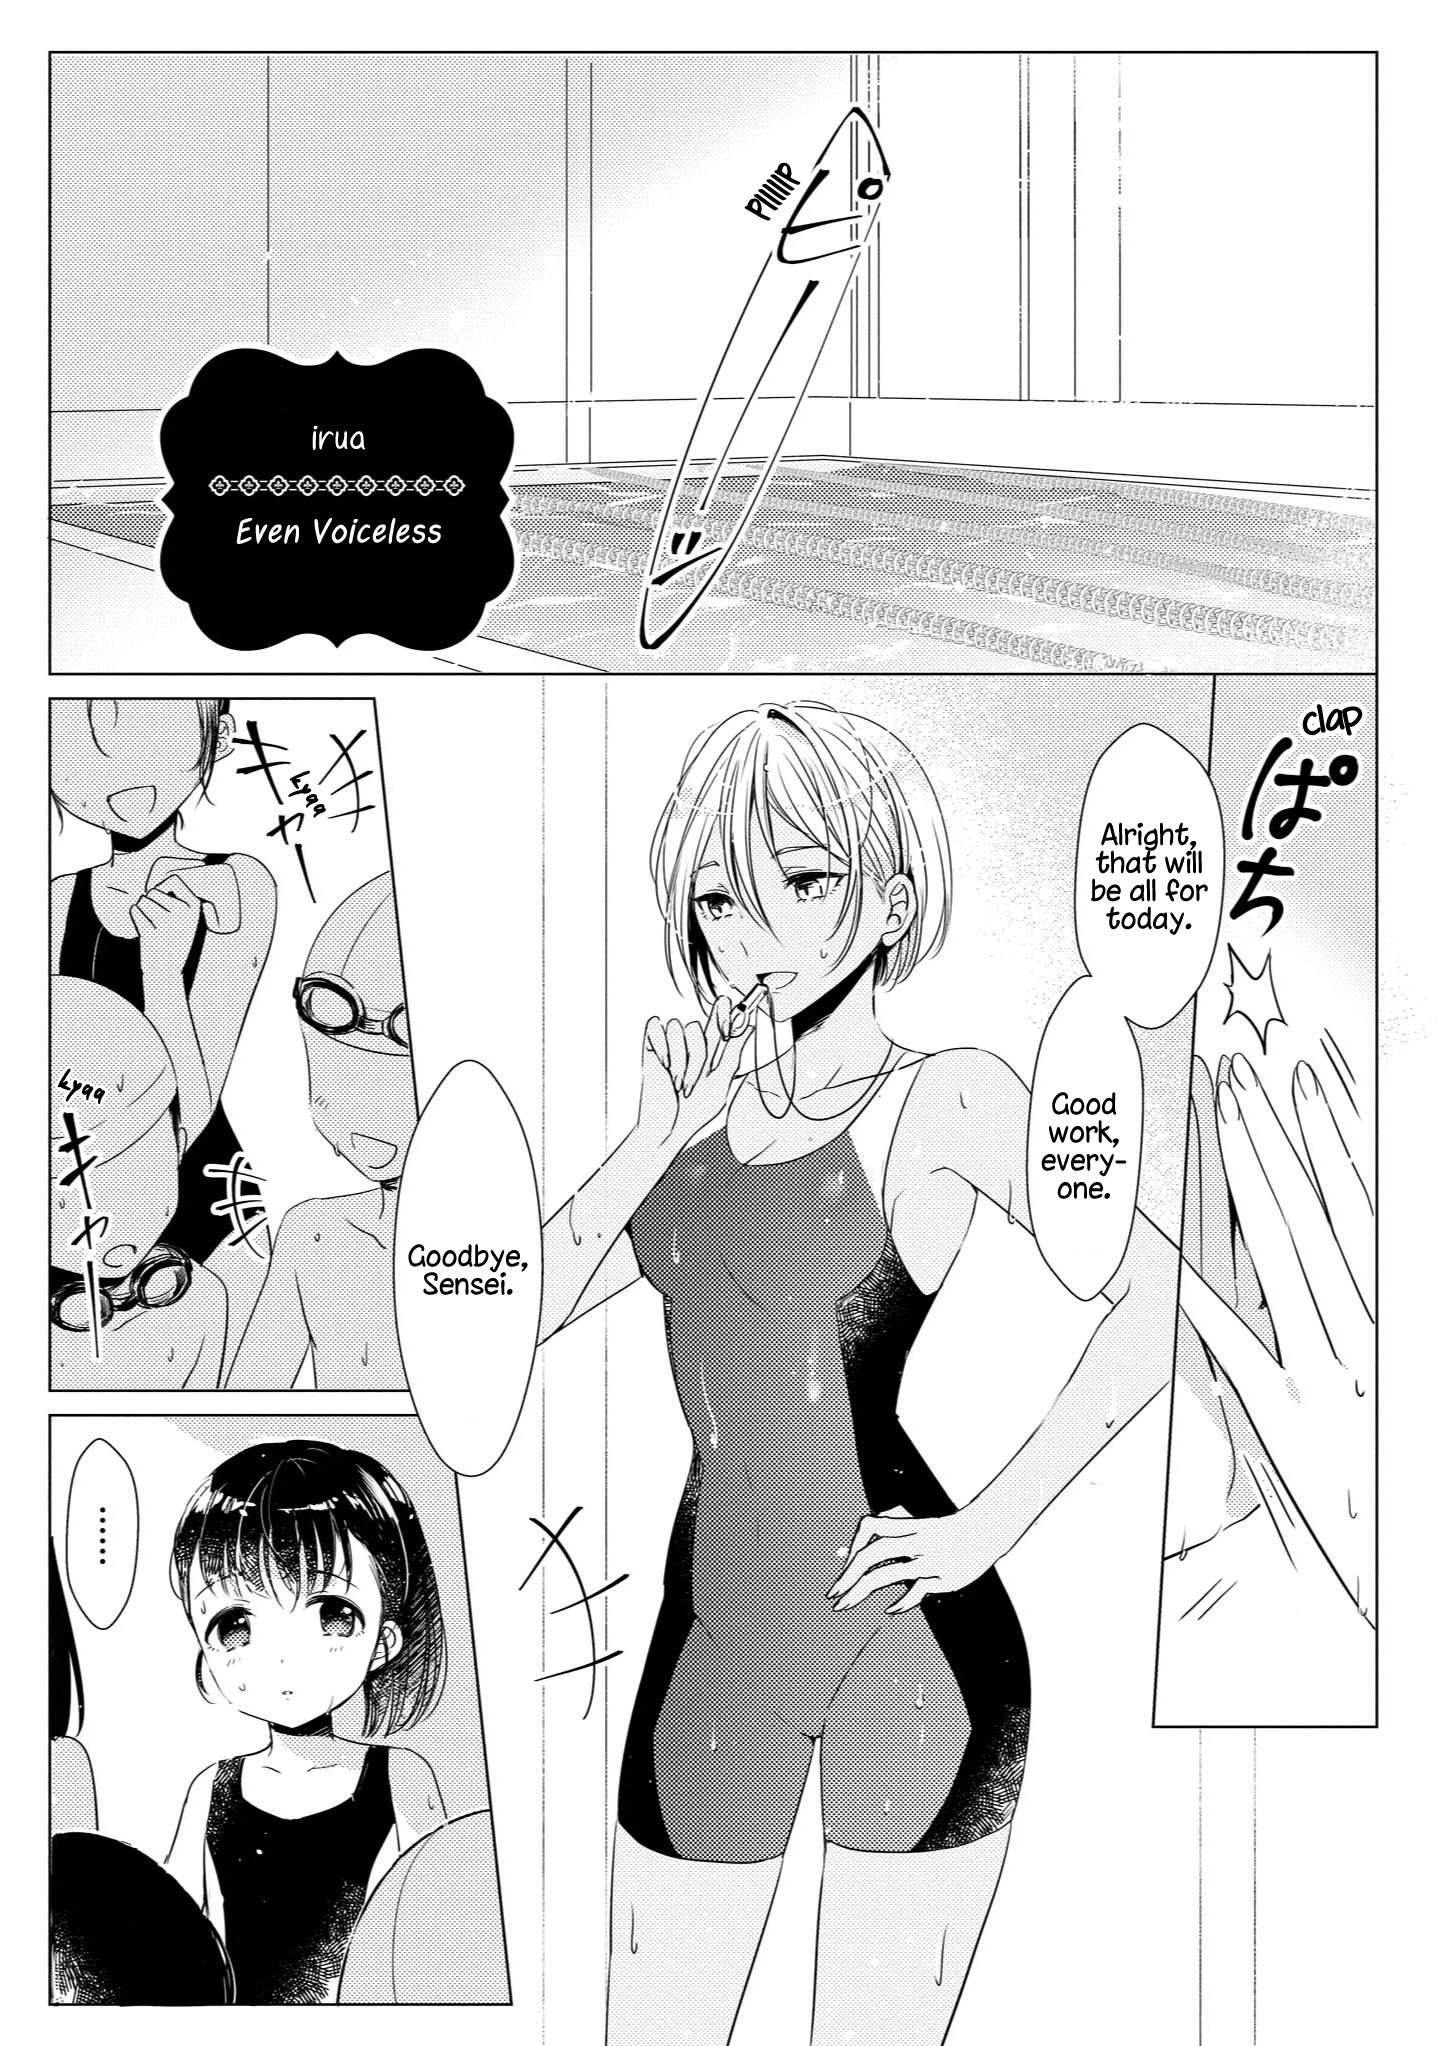 Parfait: Onee-Loli Yuri Anthology Vol.2 Chapter 21: Even Voiceless - Picture 1